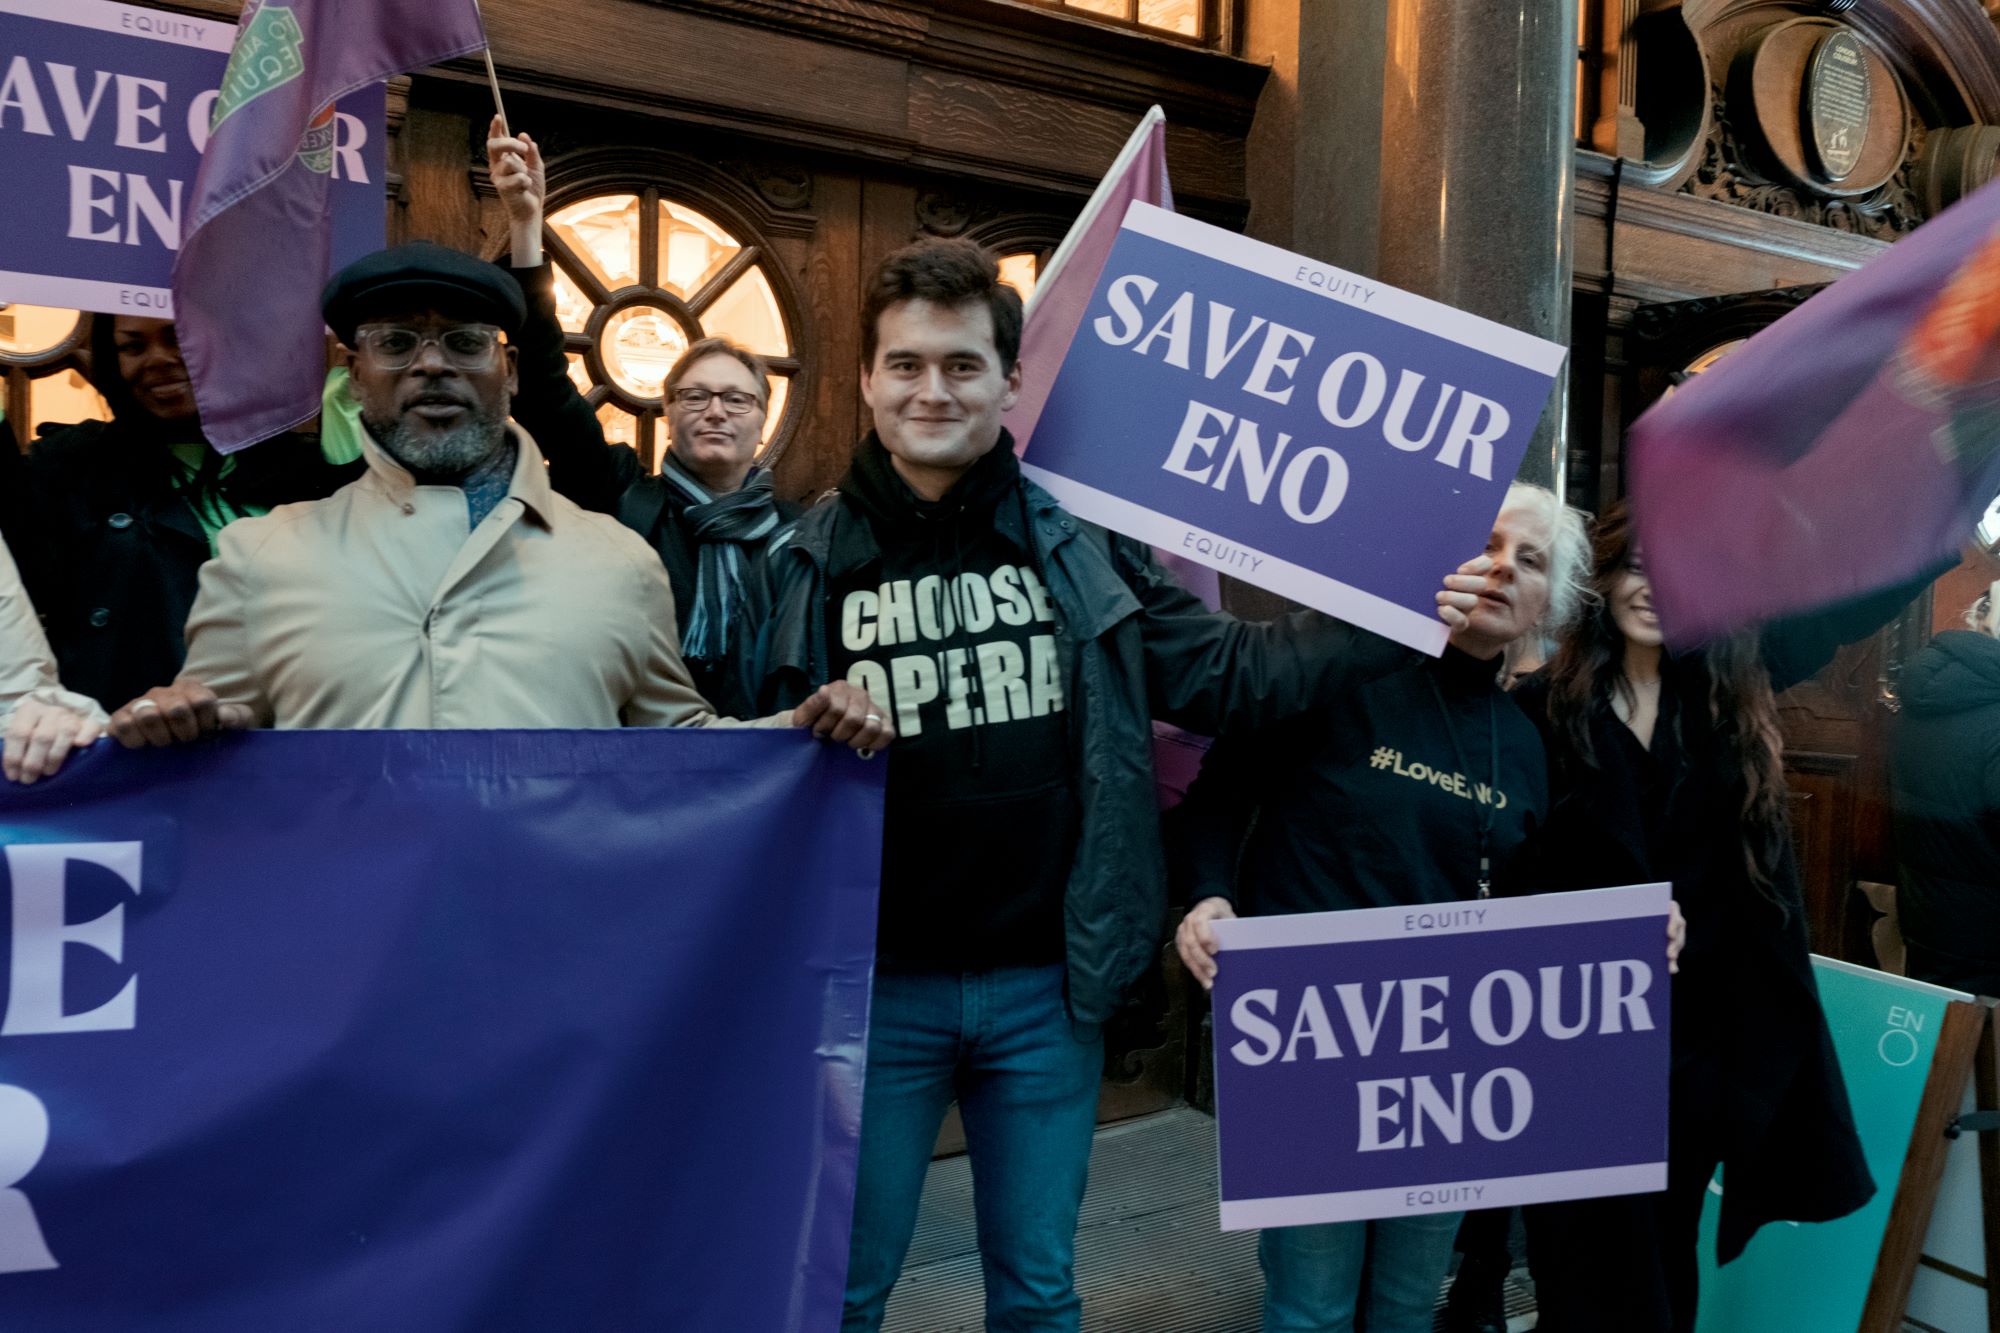 Save our ENO banners and members